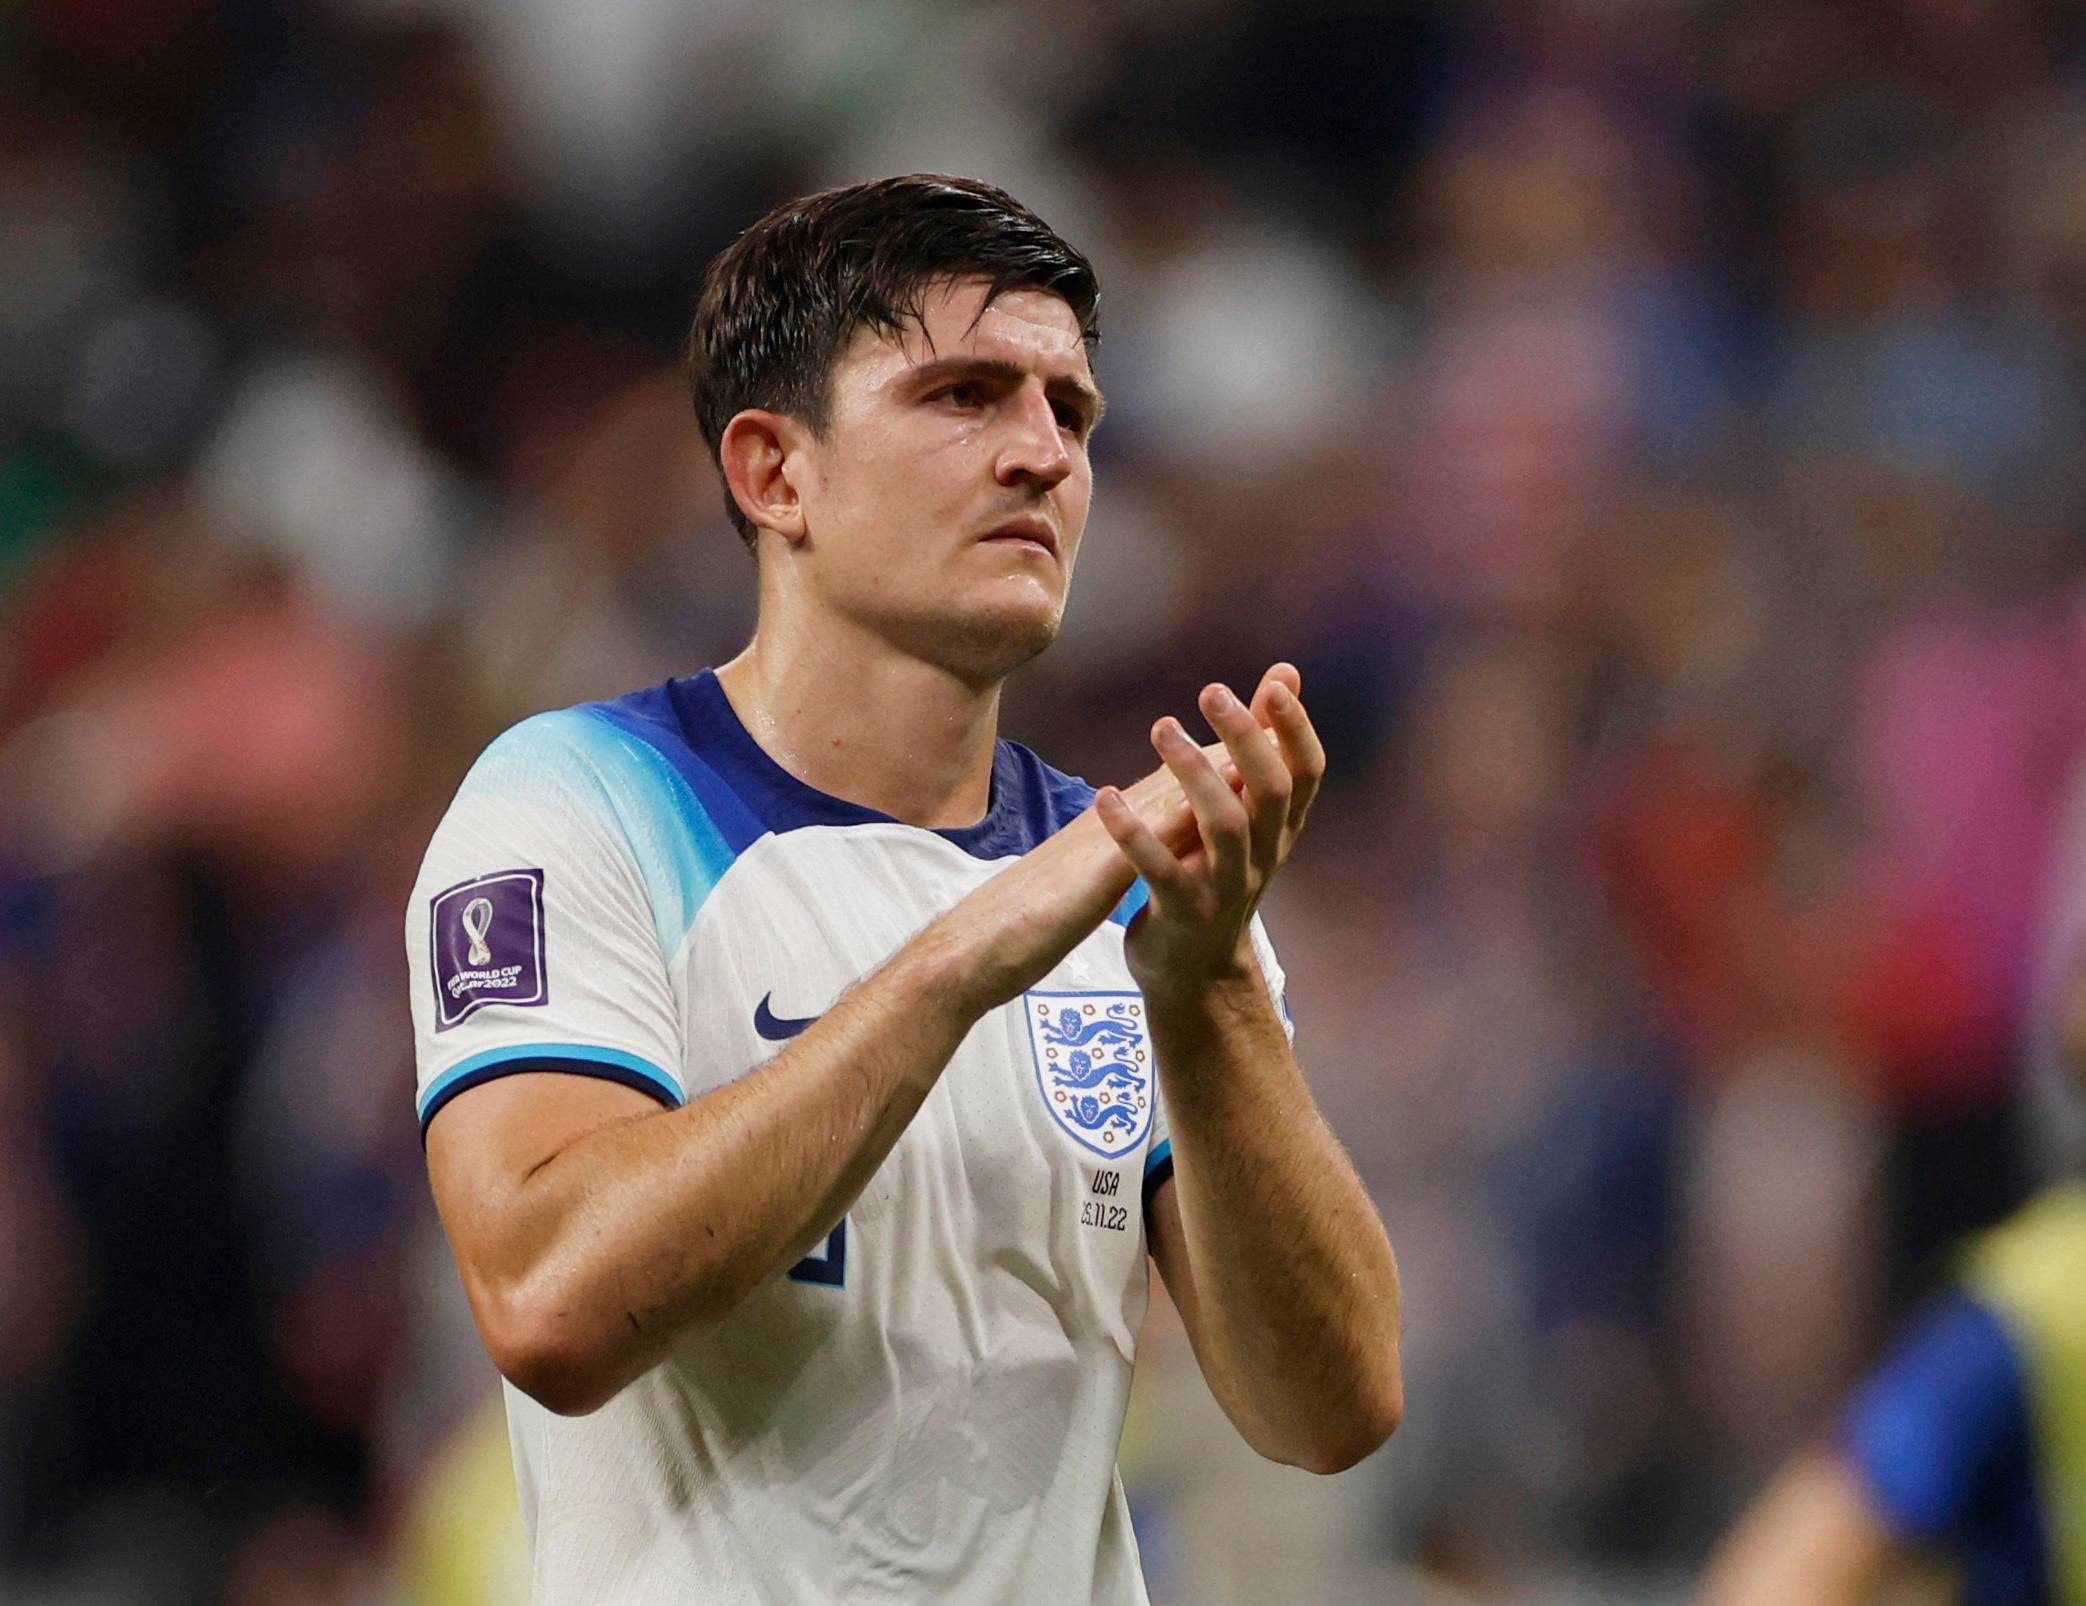 England's Maguire clapping vs USA.